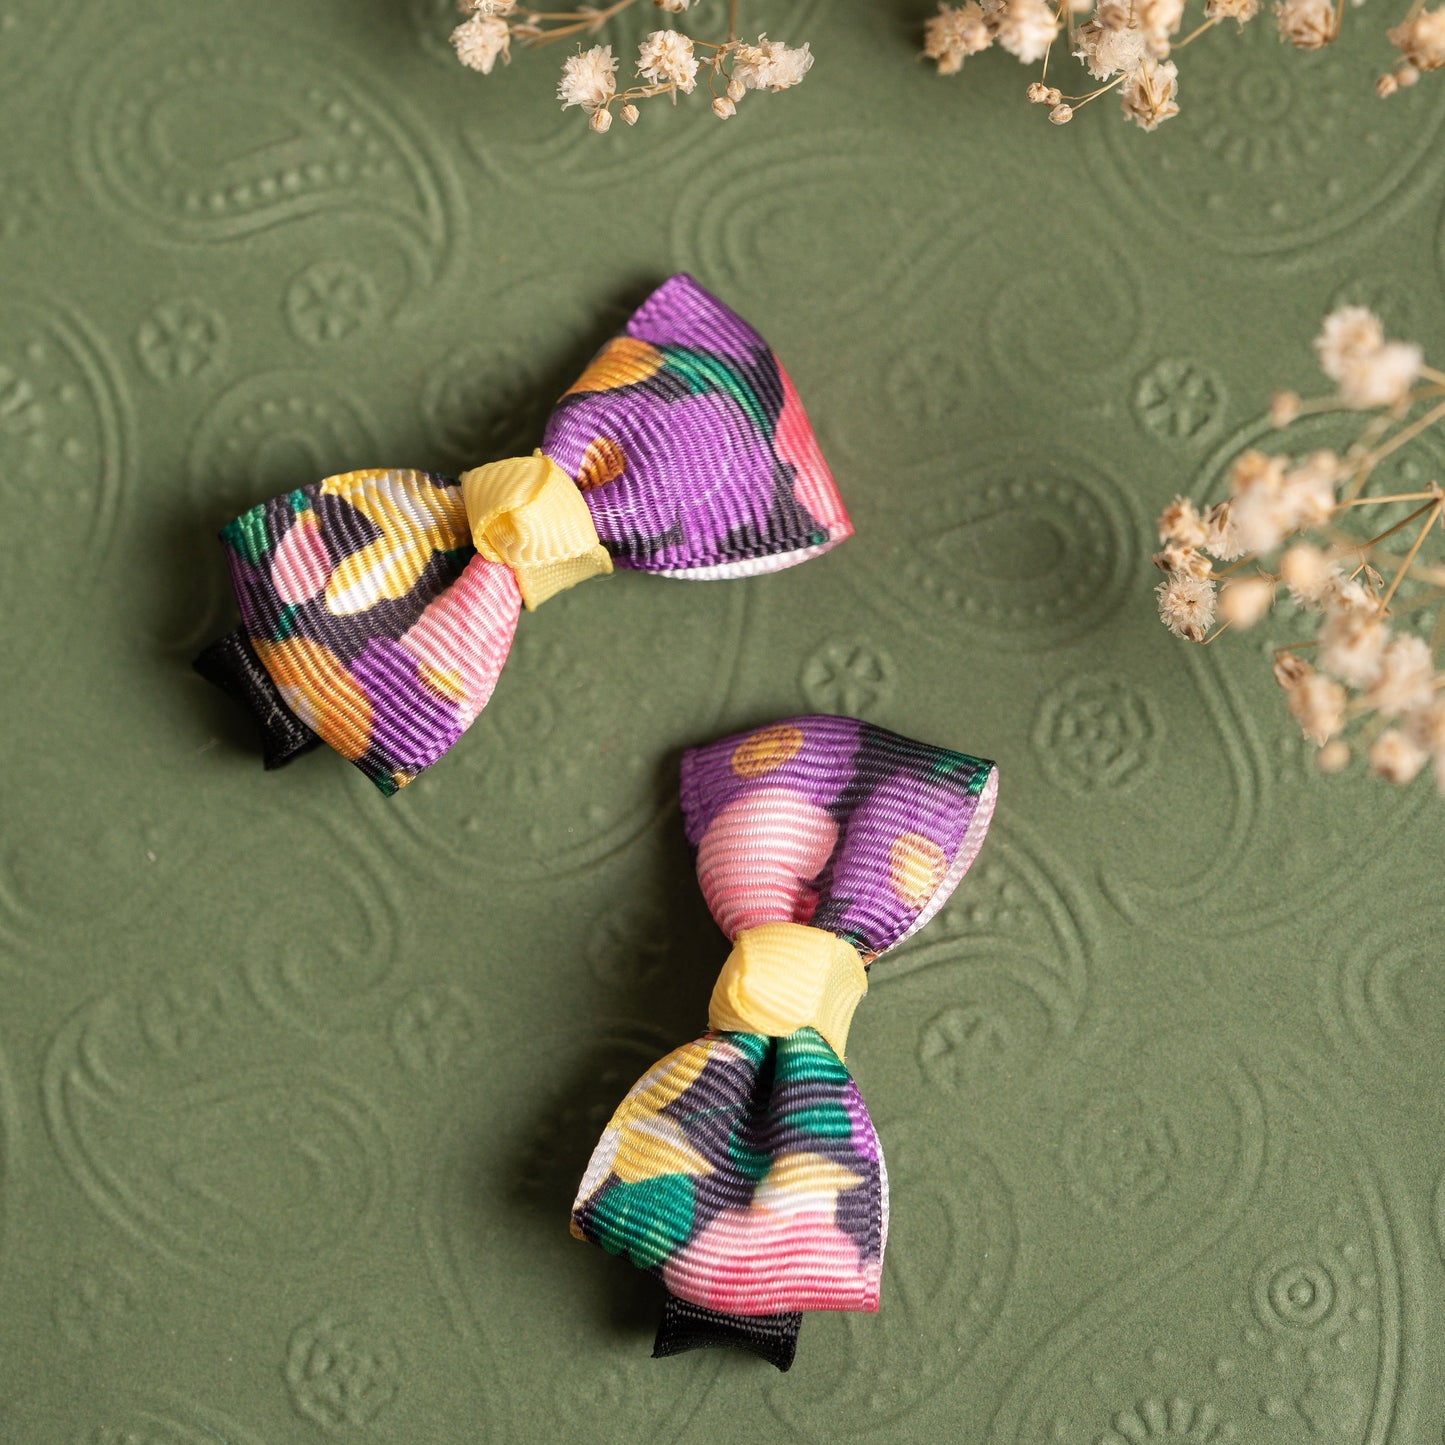 Ribbon Candy- Printed Bow on Alligator Pin- Purple